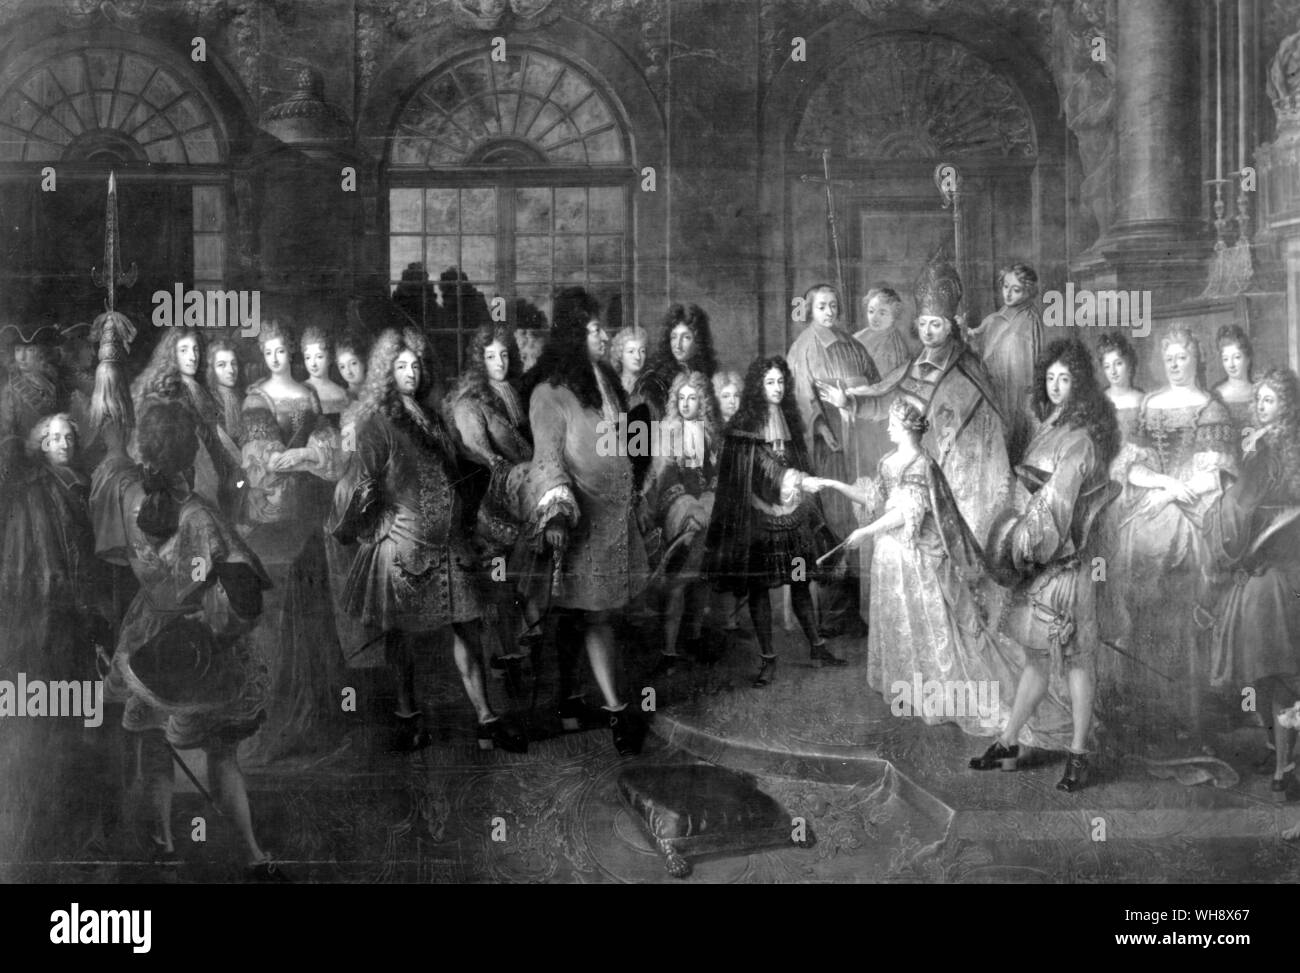 Marriage of the Duc de Bourgogne and Princess Marie-Adelaide of Savoy, 7th December 1697 by Antoine Dieu. Behind the Duc de Bourgogne are the Ducs d'Anjou and Berry. Louis is supported by a stick with his son, the grand Dauphin, be4hind him. To the right are Monsieur, with his son the Duc de Chartres and the Duchess of Orleans and Chartres. Stock Photo